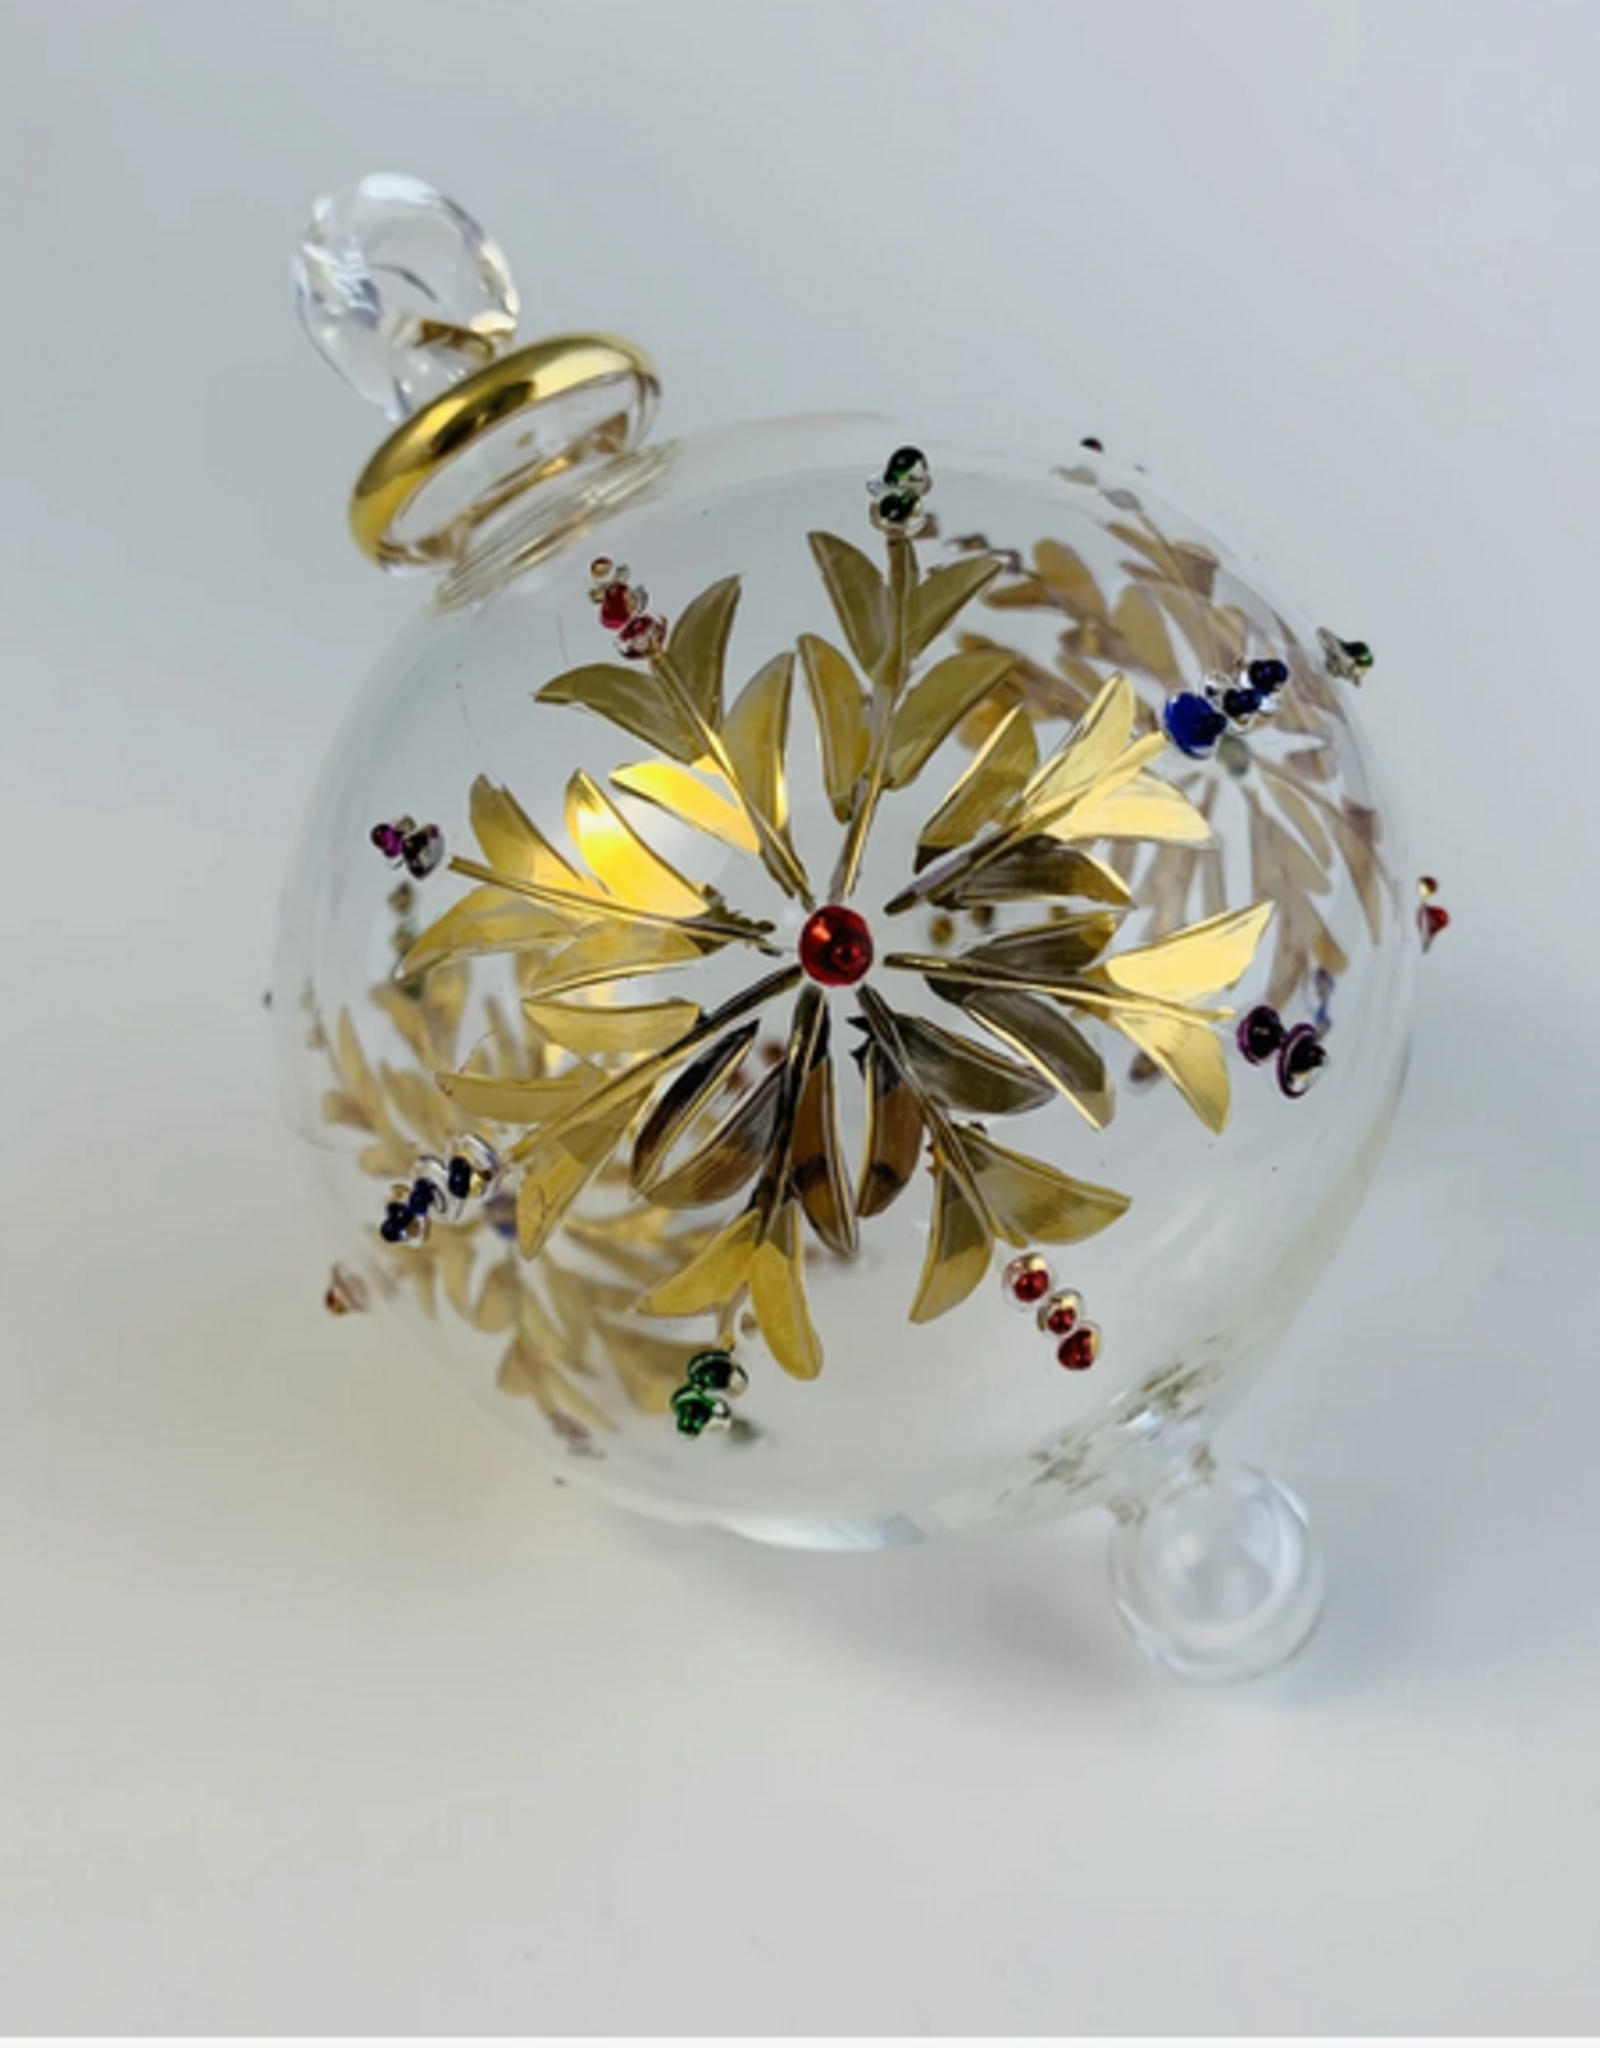 Egypt Ornament Gold Snowflake with Colours Blown Glass - Egypt